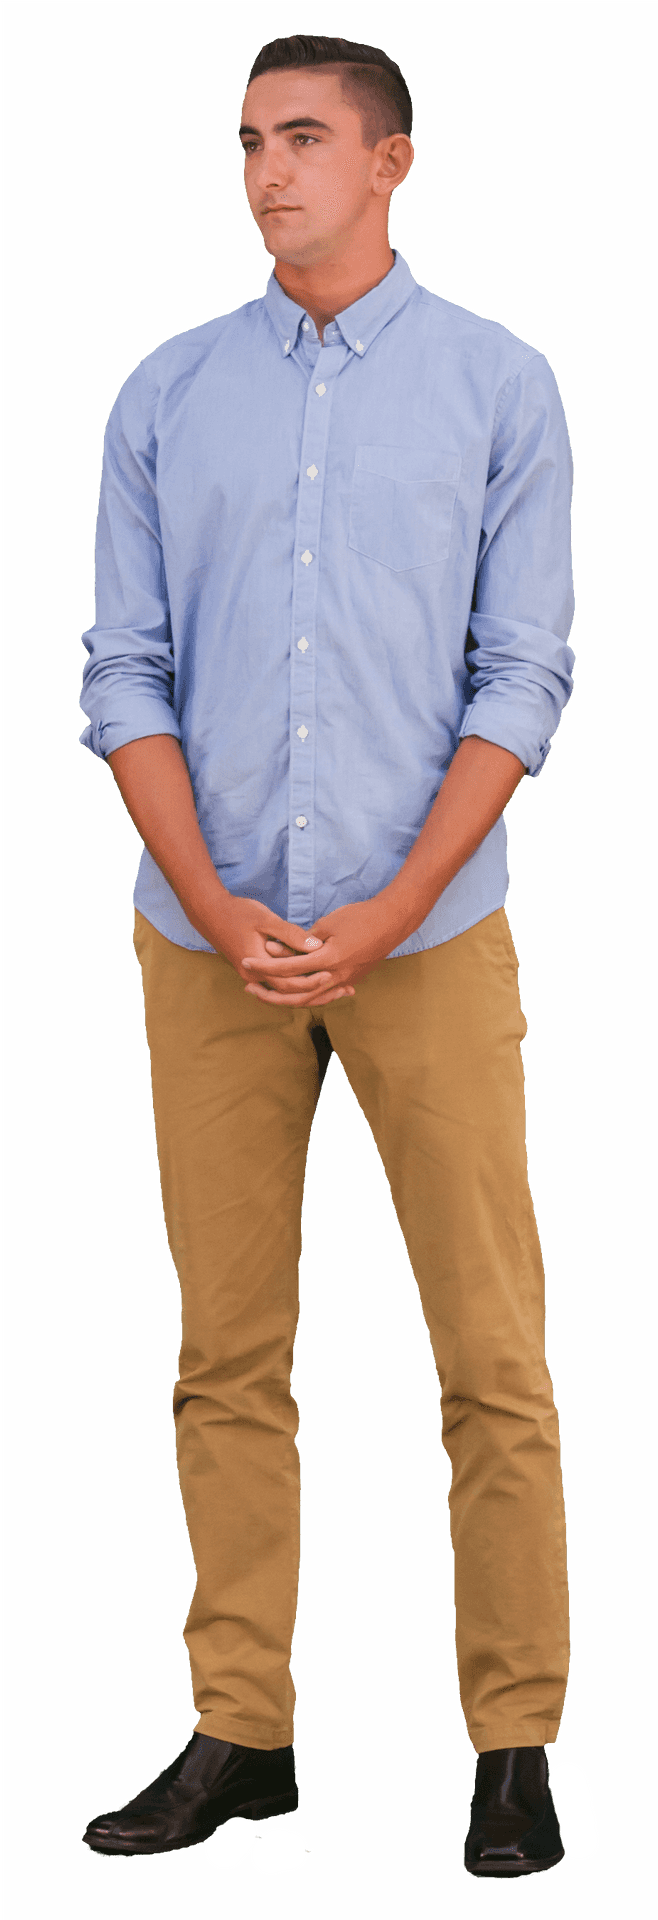 Casual Man Standing Green Screen Background PNG